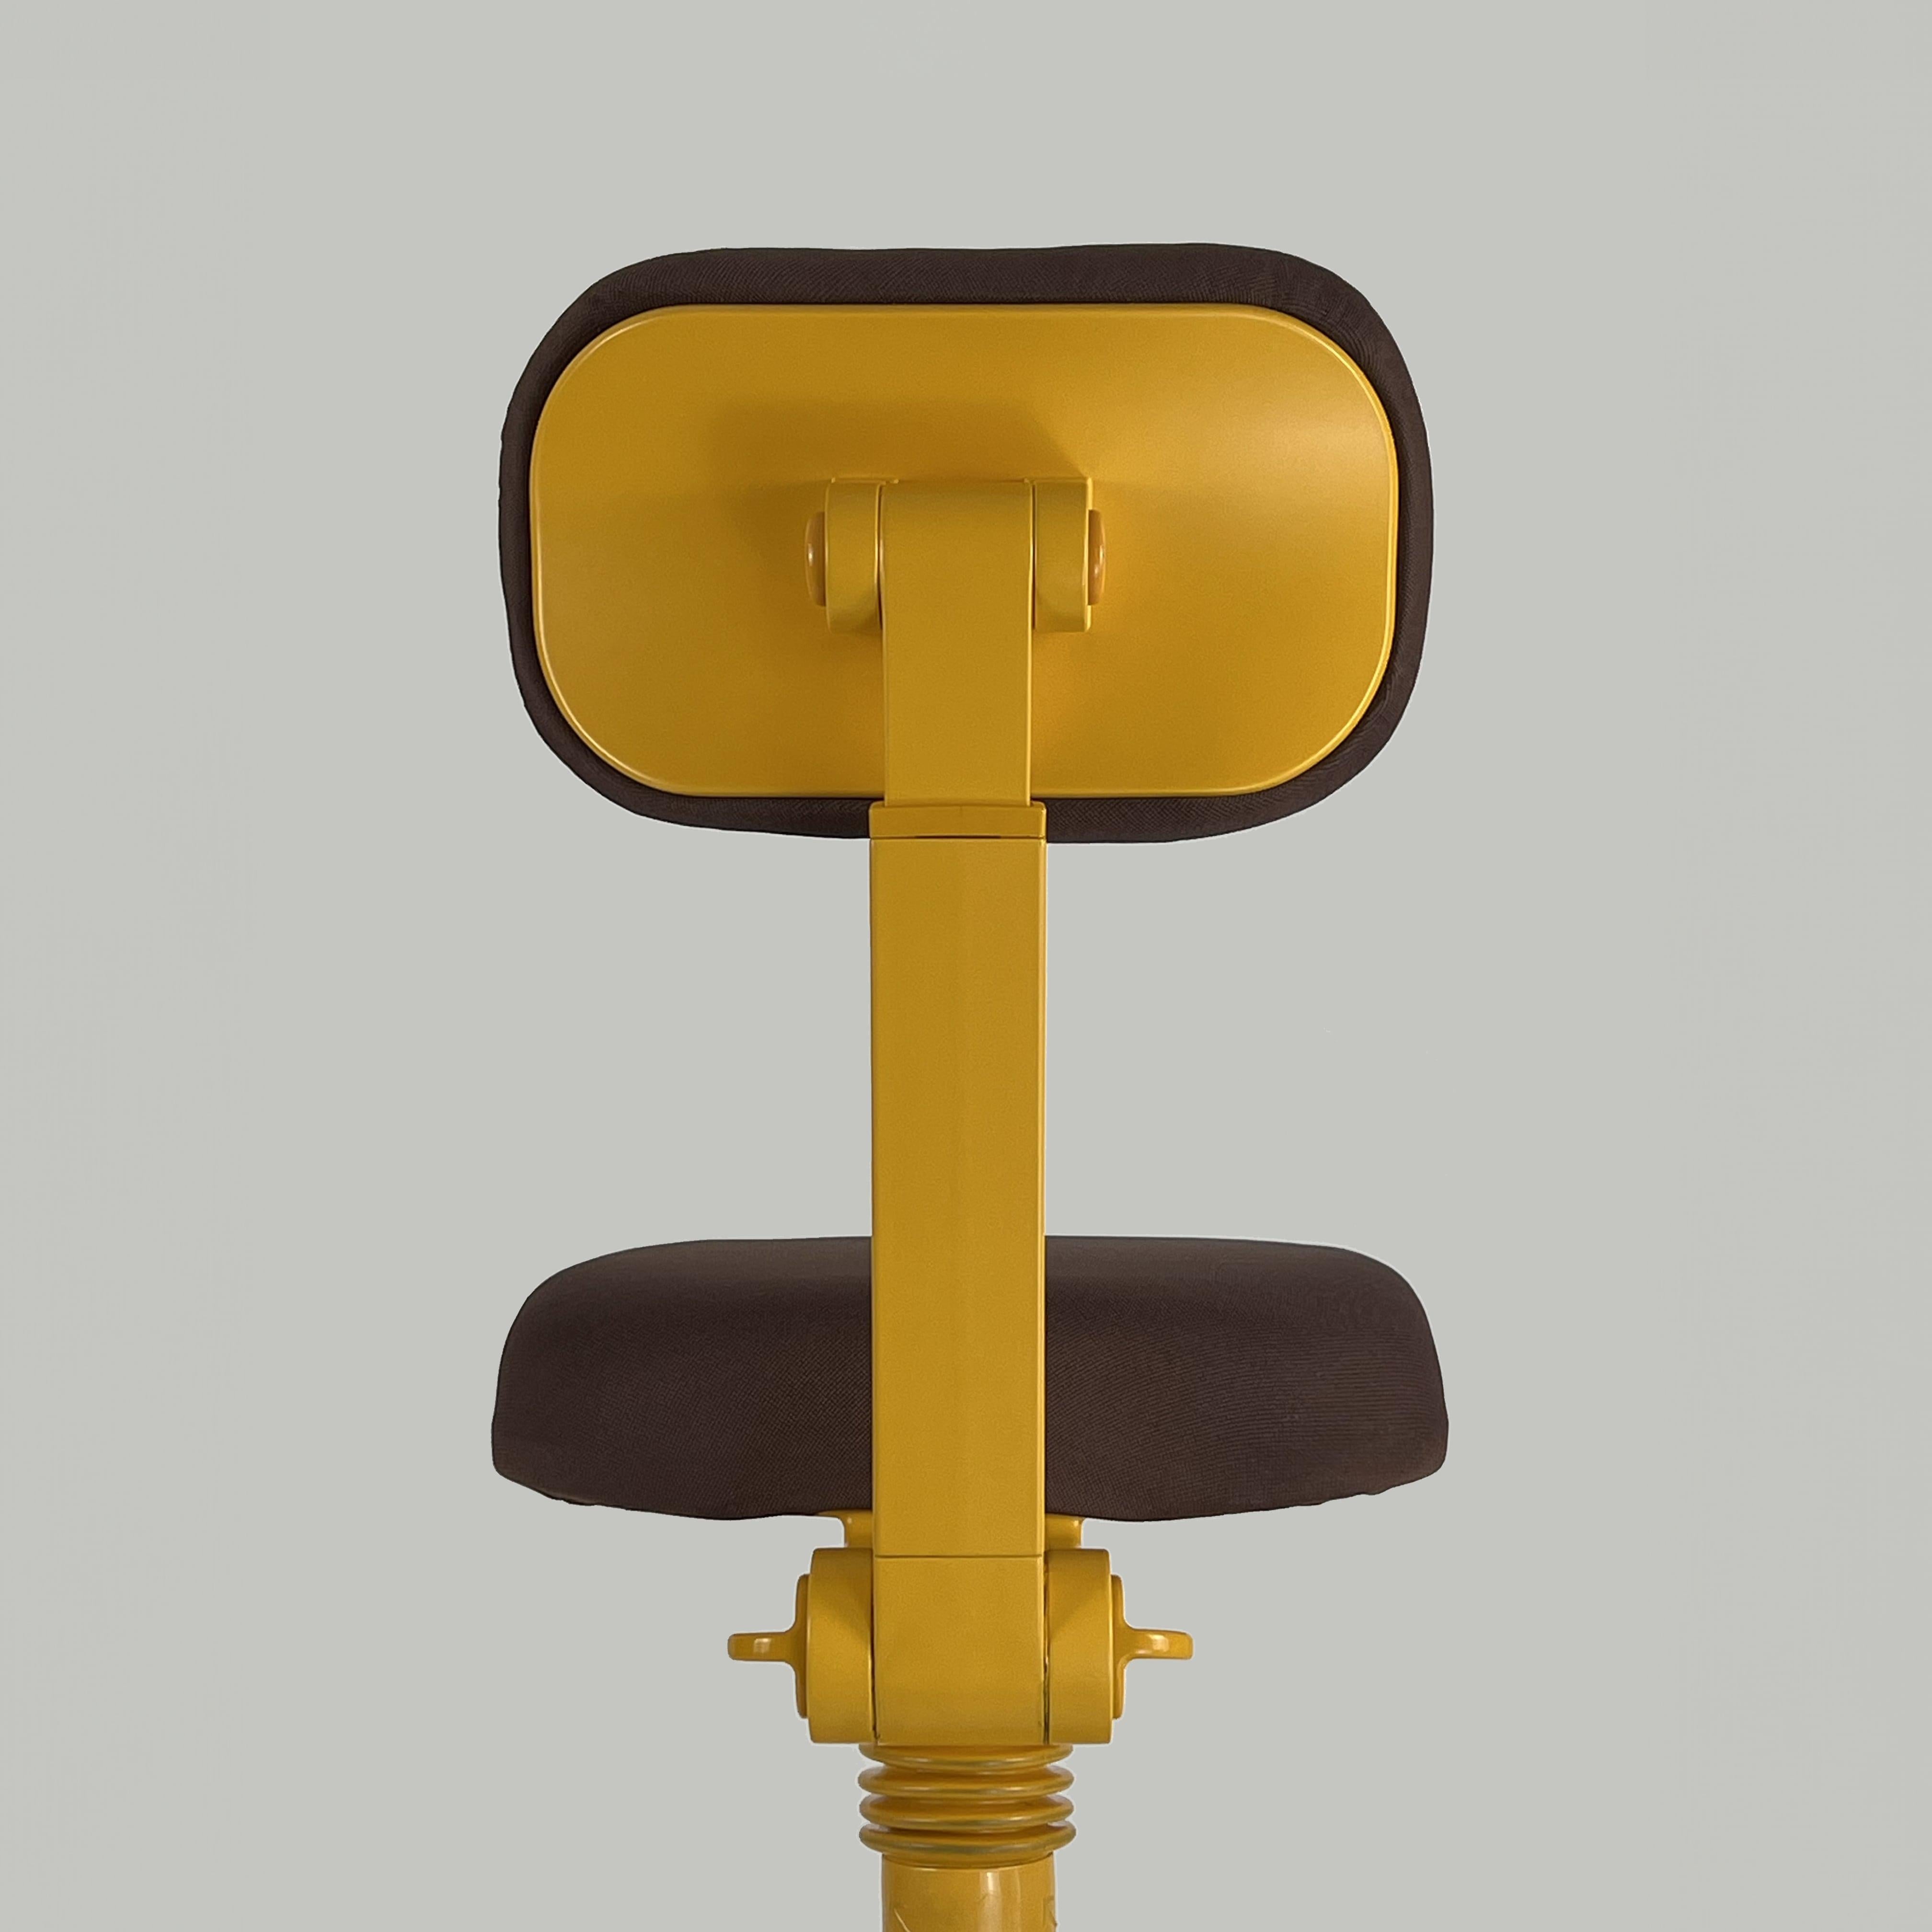  Desk Chair Mod.Synthesis 45 Designed by Ettore Sottsass for Olivetti, Italy 197 For Sale 2